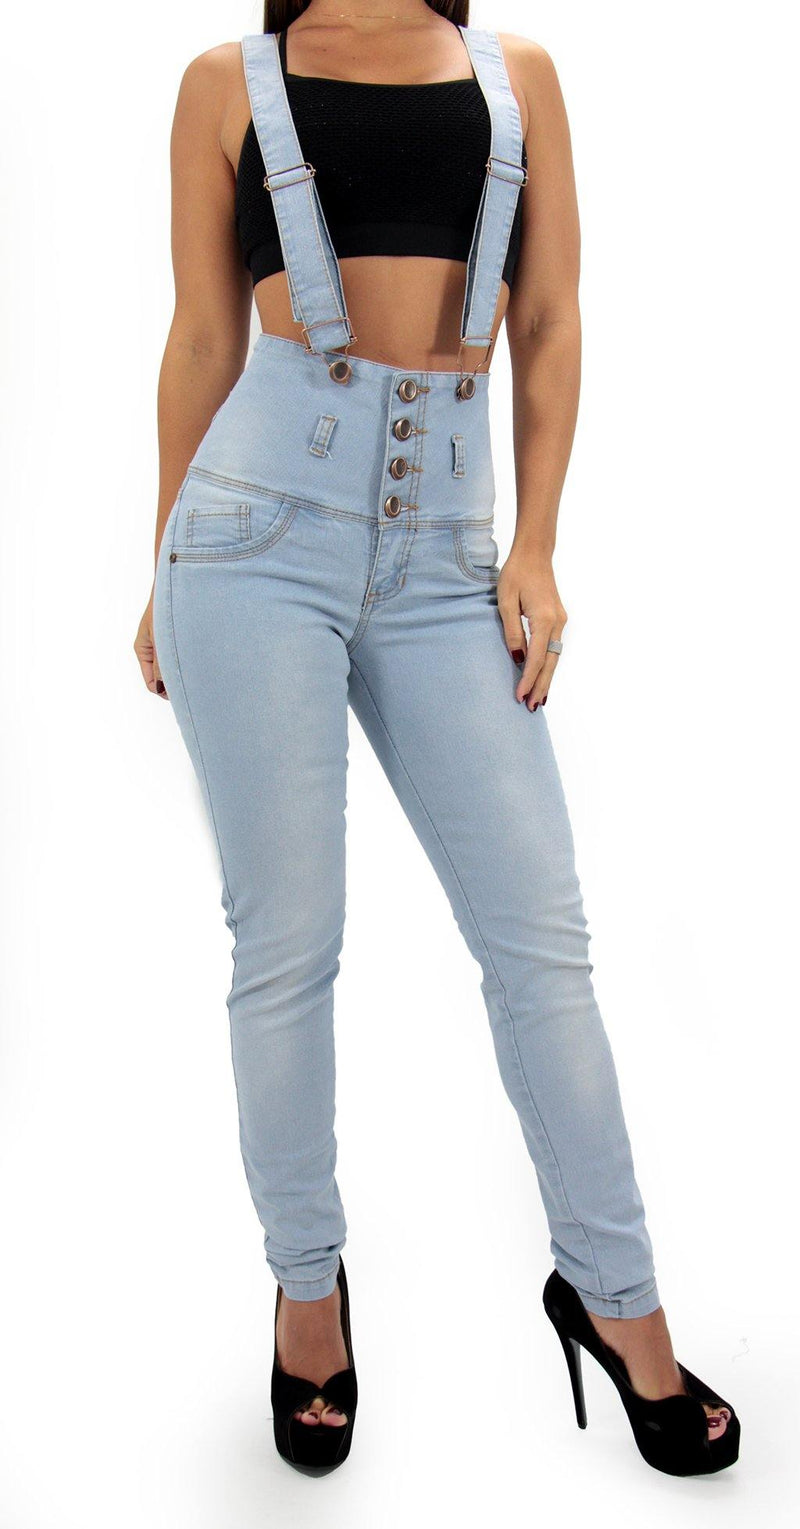 LAST ONE 17410 Maripily Strap High Waist Skinny Jean - Pompis Stores